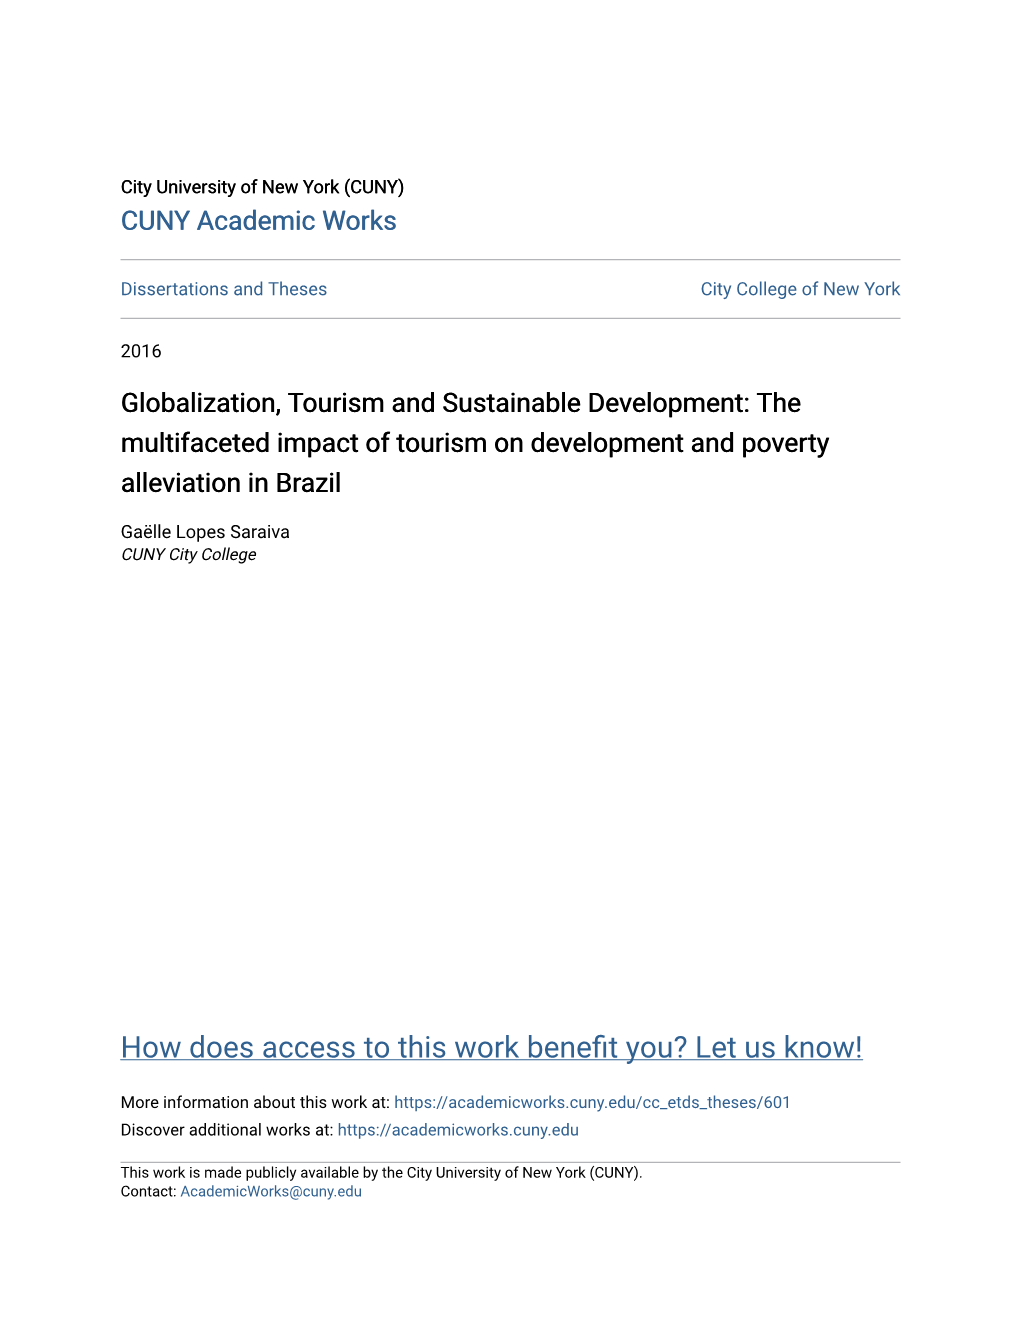 Globalization, Tourism and Sustainable Development: the Multifaceted Impact of Tourism on Development and Poverty Alleviation in Brazil